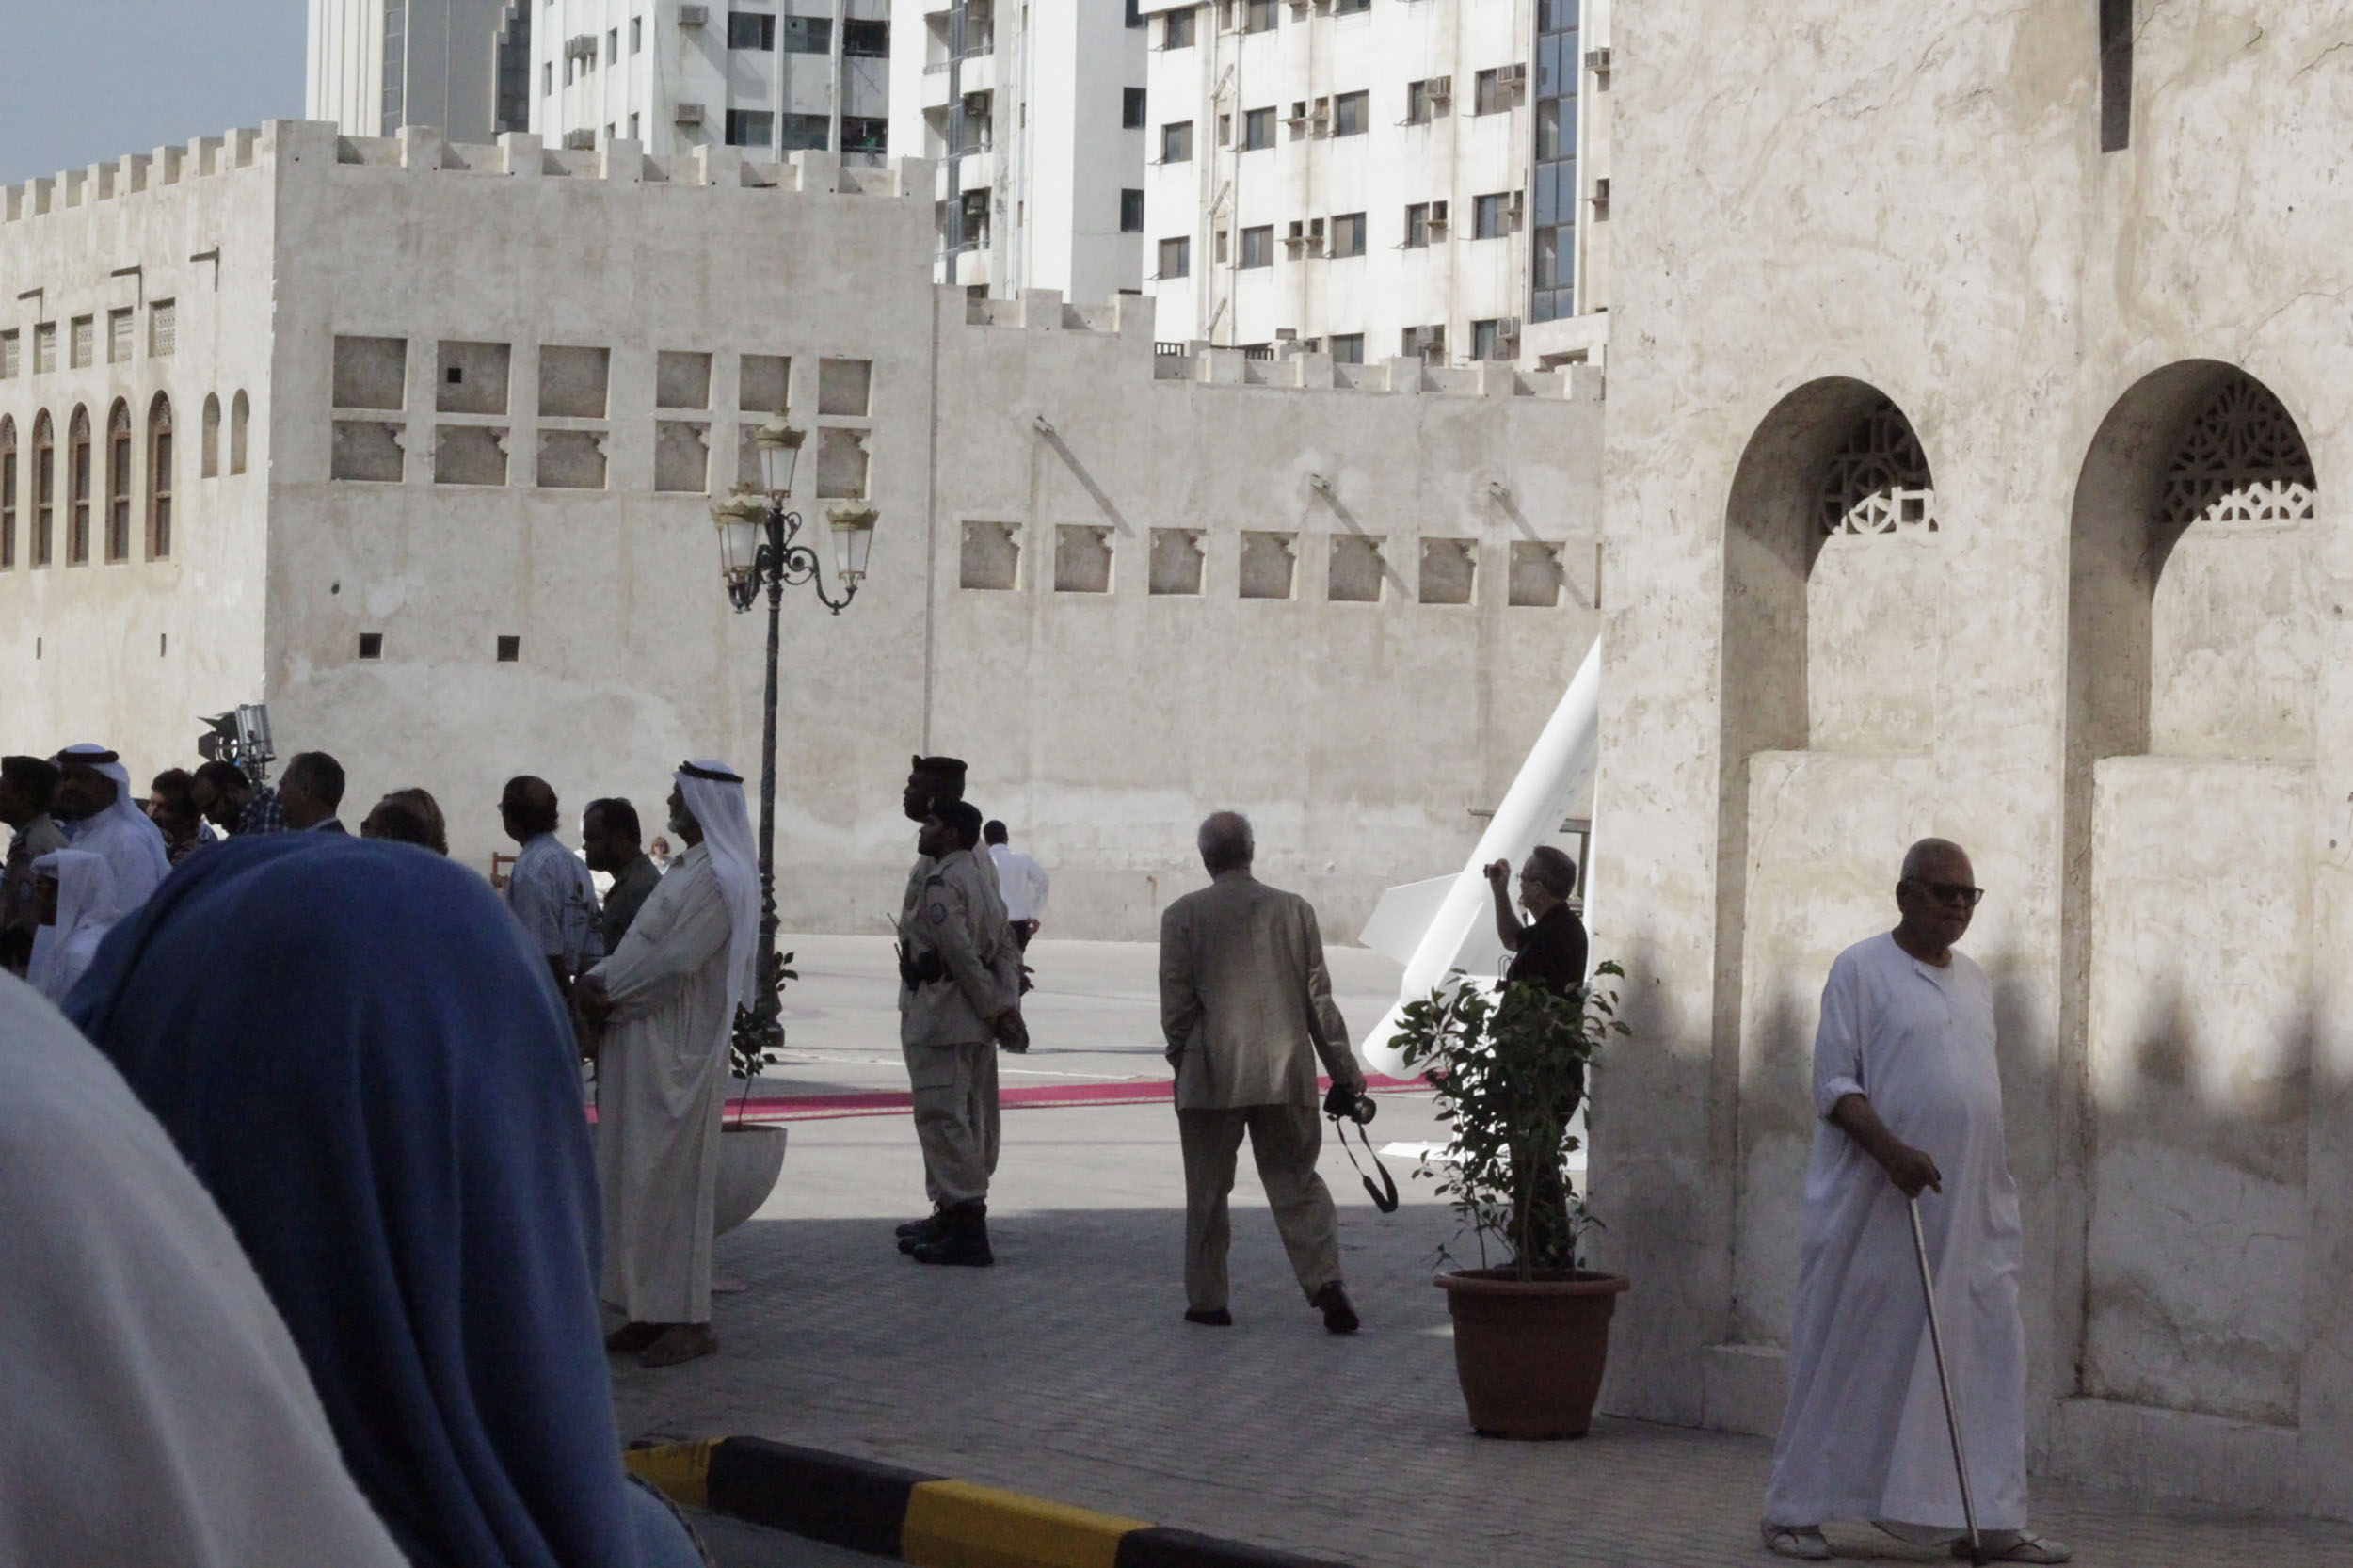 Opening of the 10th Sharjah Biennial, 2011. Photo: Richard Ibghy & Marilou Lemmens